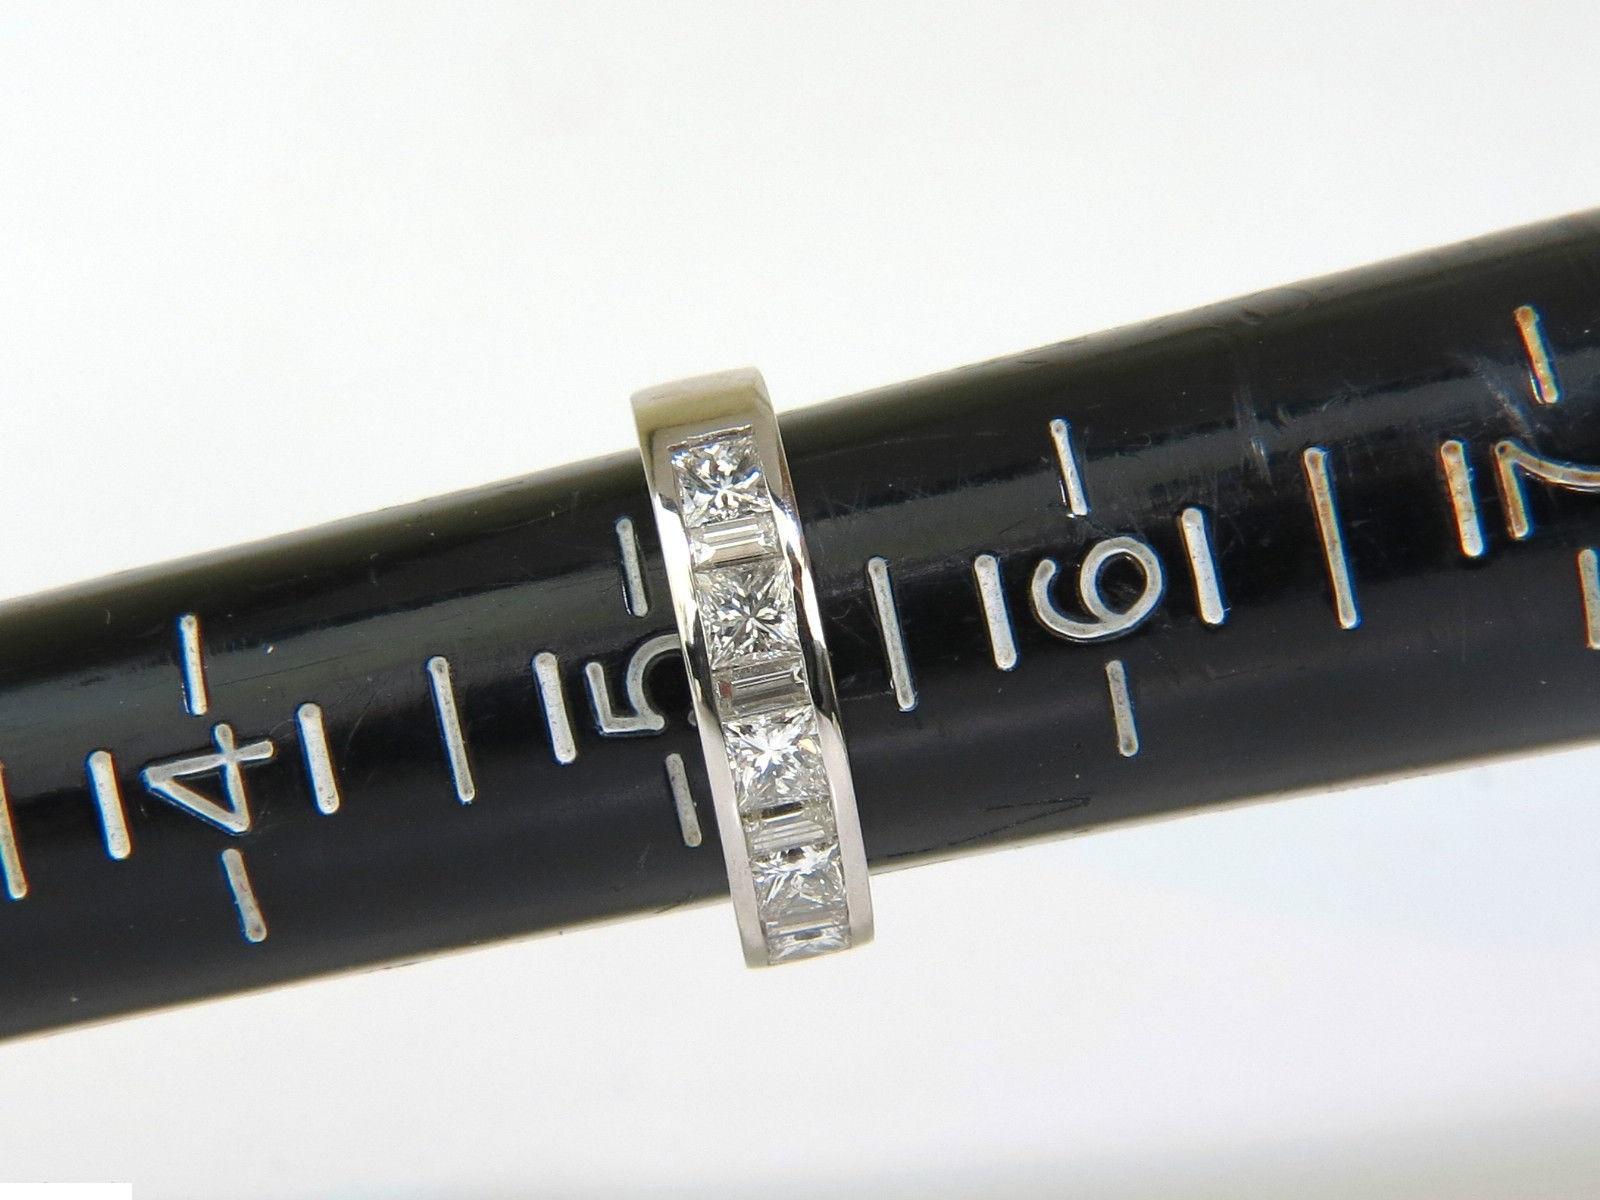 Baguettes & princess' band



1.50ct. Natural Diamonds 

Full cuts & Faceted brilliant

H-color, Vs-1 clarity

Platinum

7.5 grams



current ring size: 

5.25

& 

possible to resize, please inquire 

Ring is 4.5 mm wide



$6000 appraisal will